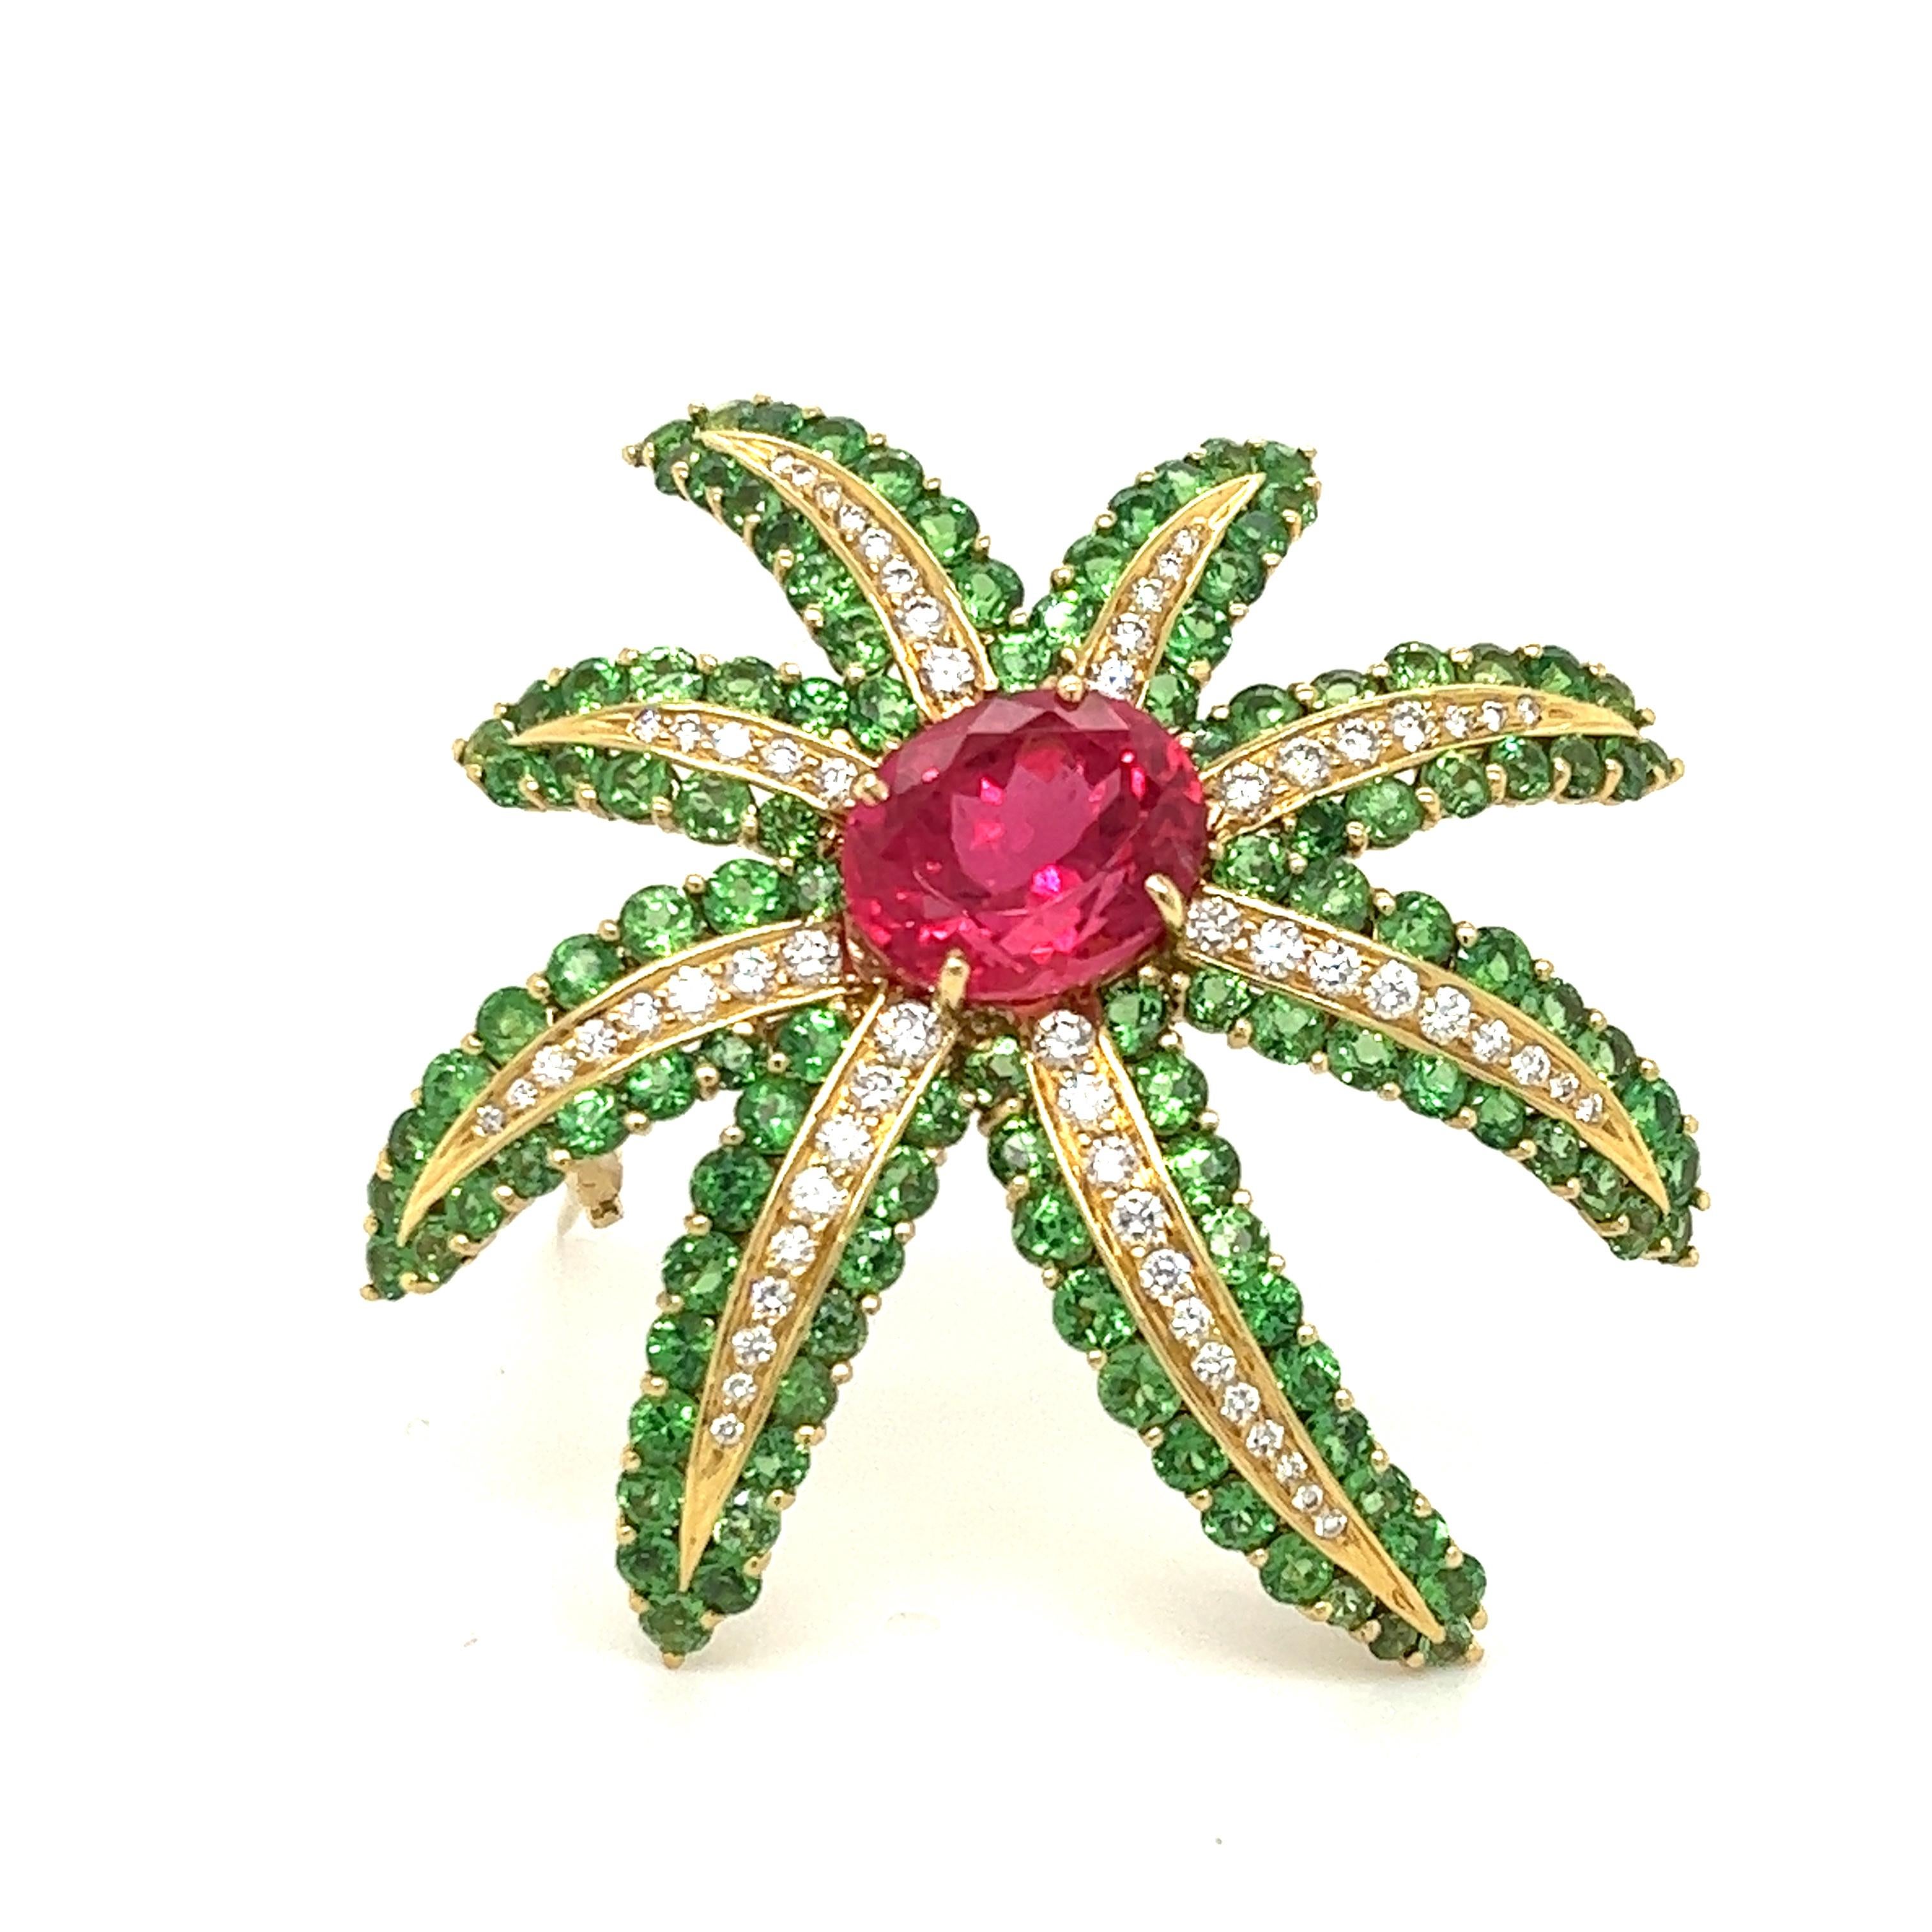 One fantastic design seen on this Tiffany & Co. brooch. The brooch is crafted in 18k yellow gold and explodes with color.  The piece is from the Fireworks collections crated in 1993. 

The brooch highlights one Pink Tourmaline gemstone that is oval